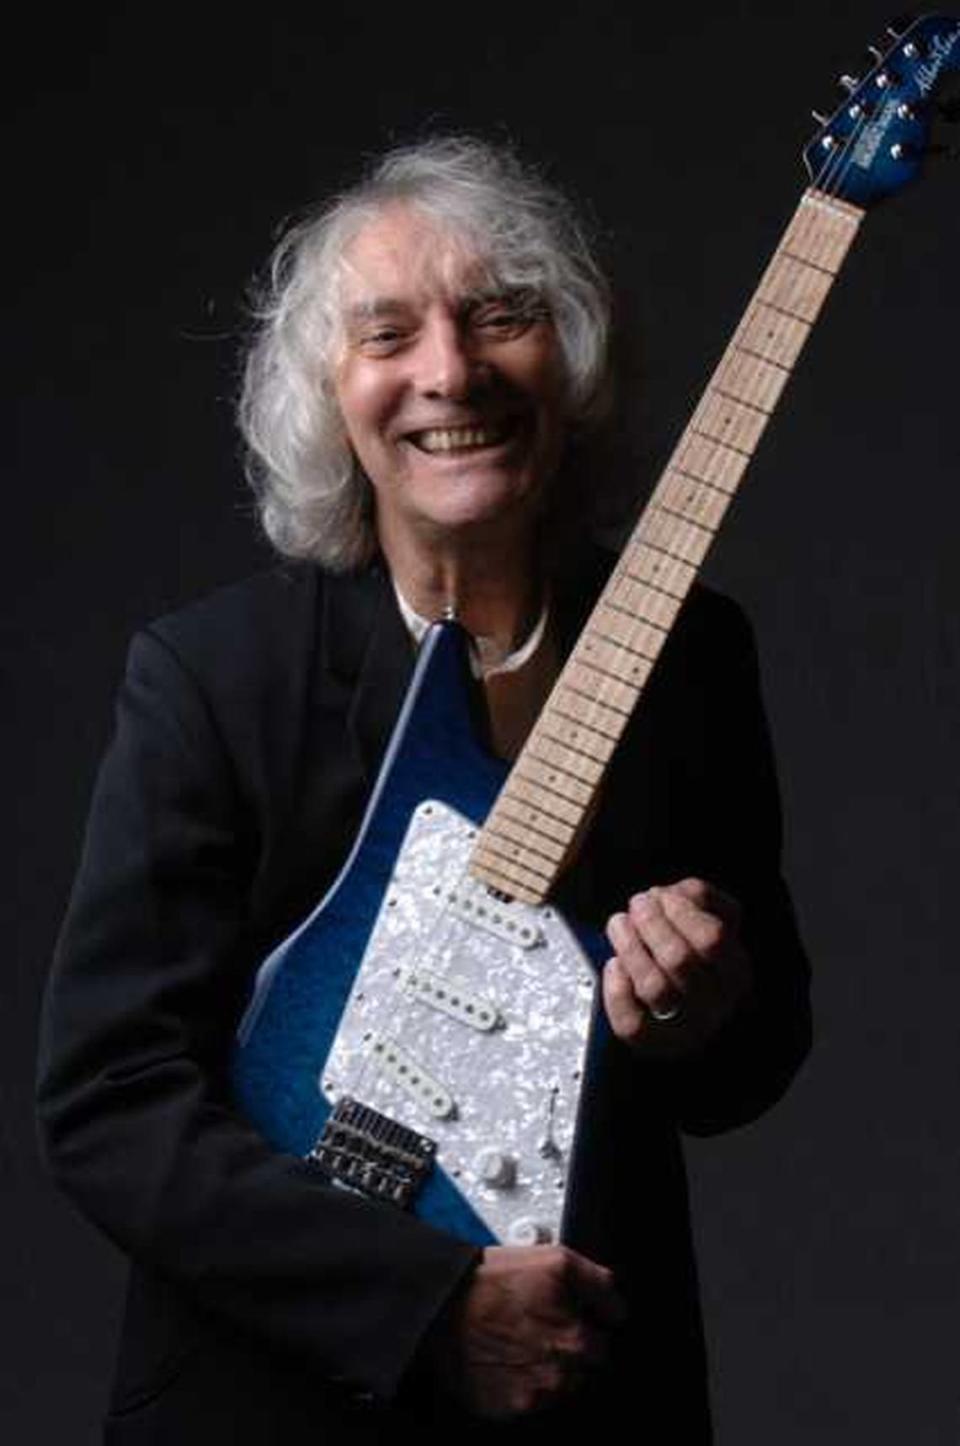 British guitar virtuoso Albert Lee will perform at The Sofia, Home of B Street Theatre, in Sacramento on Saturday, July 8.